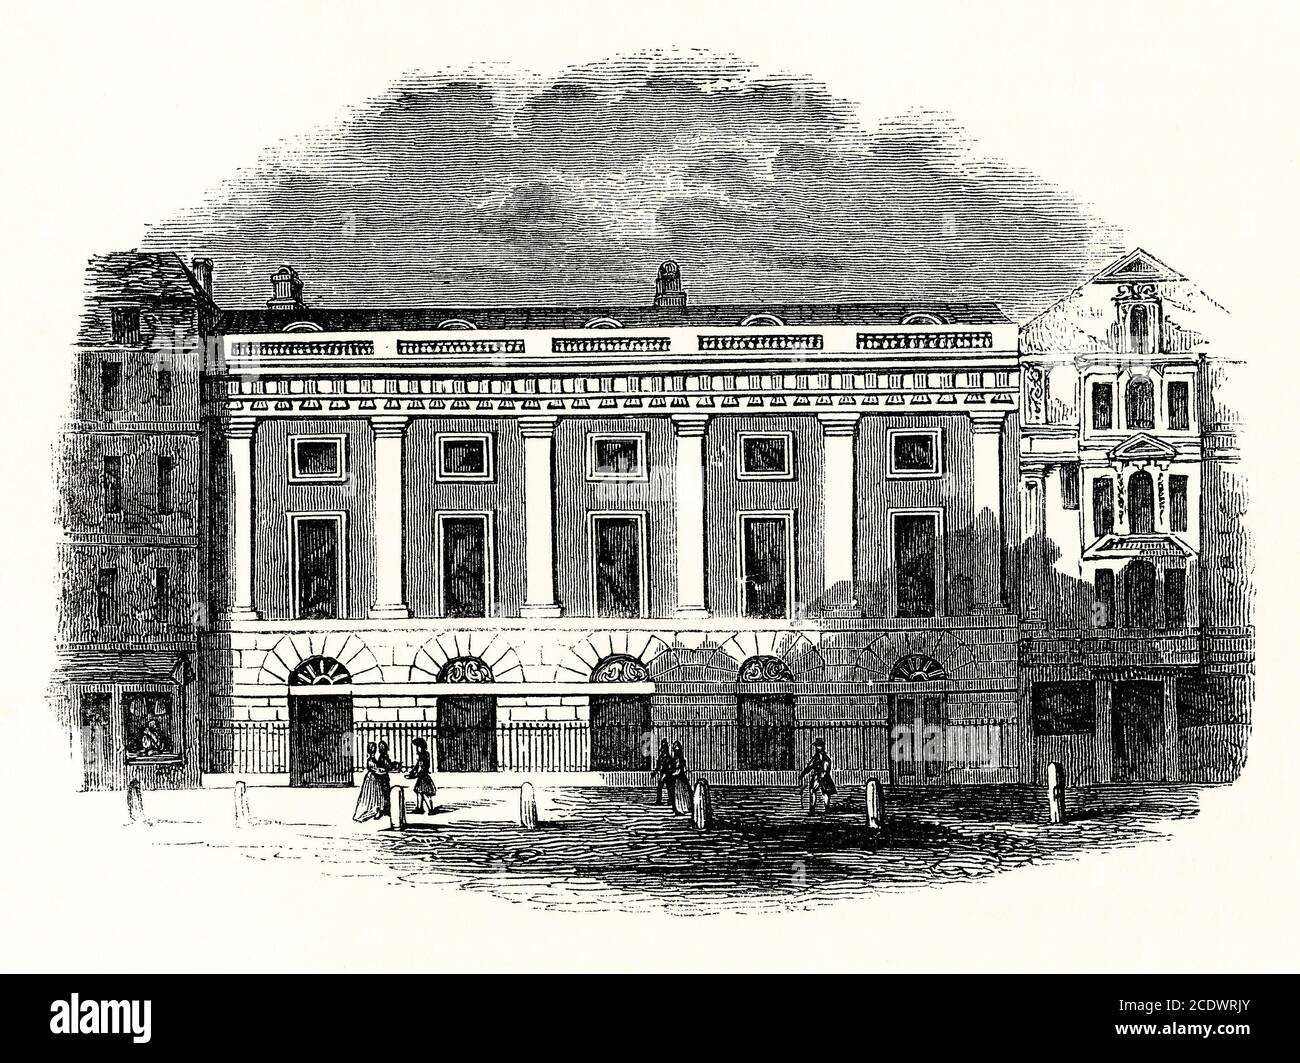 An old engraving of East India House, Leadenhall Street, City of London, England, UK c. 1725. East India House was the London headquarters of the East India Company, which governed much of India until the British government took control of the Company's assets in 1858. The first East India House on the site was an Elizabethan mansion which the Company first occupied in 1648. This was completely rebuilt in early 1700s (as shown here). It was remodelled and extended later that century. It was demolished in 1861. The Lloyd's building, HQ for Lloyd's of London, was built on the site. Stock Photo